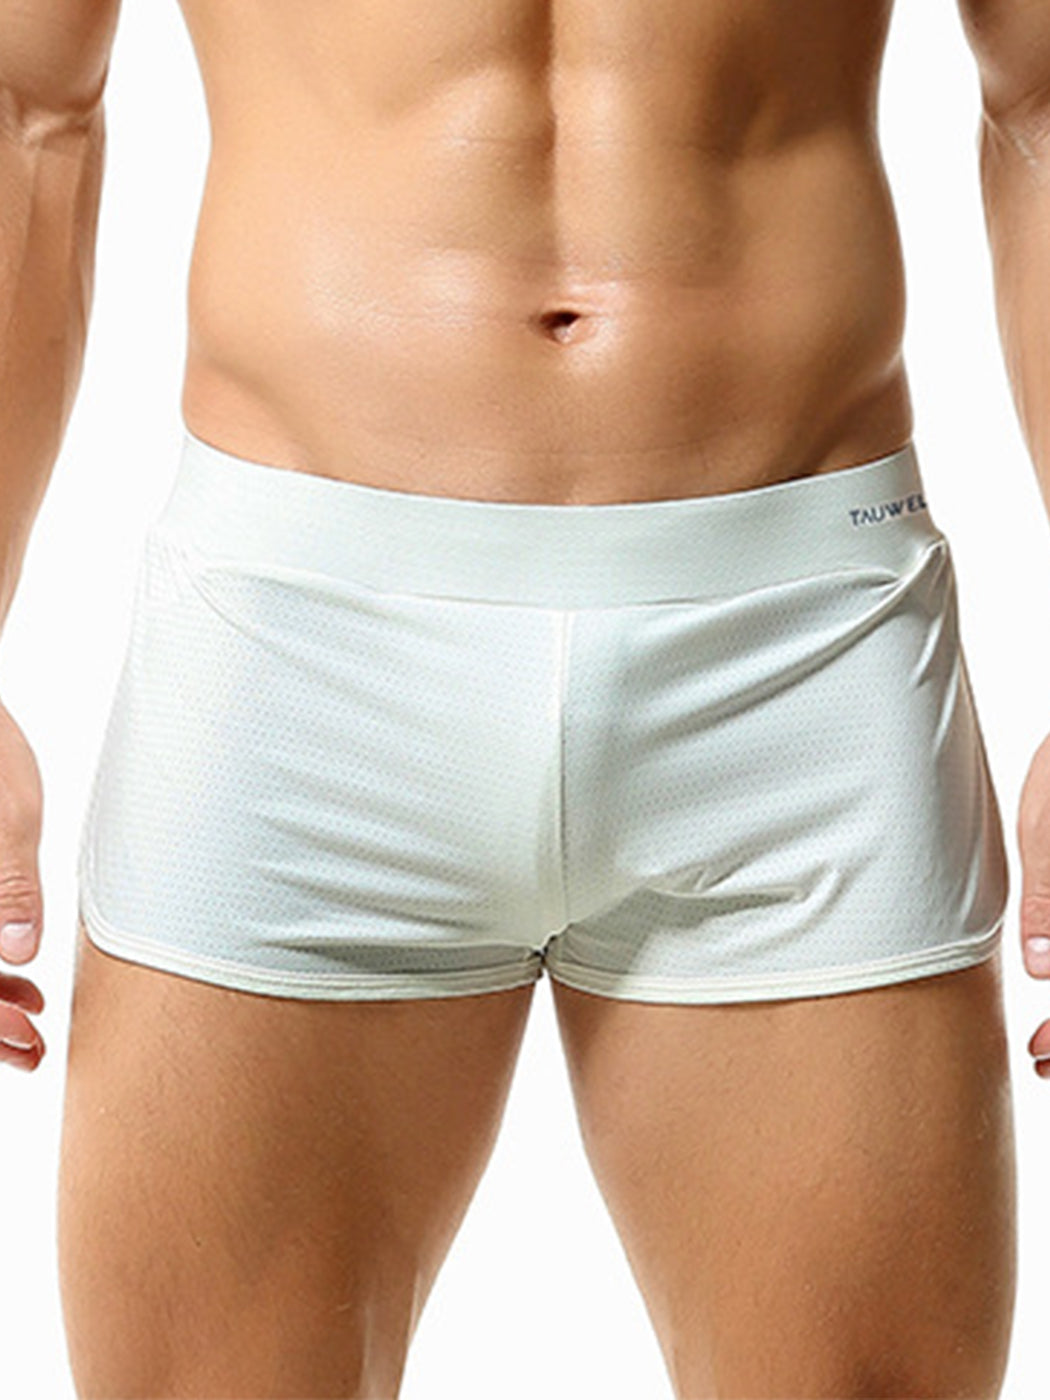 Men's Breathable Mesh Loose-fitting Home Underwear